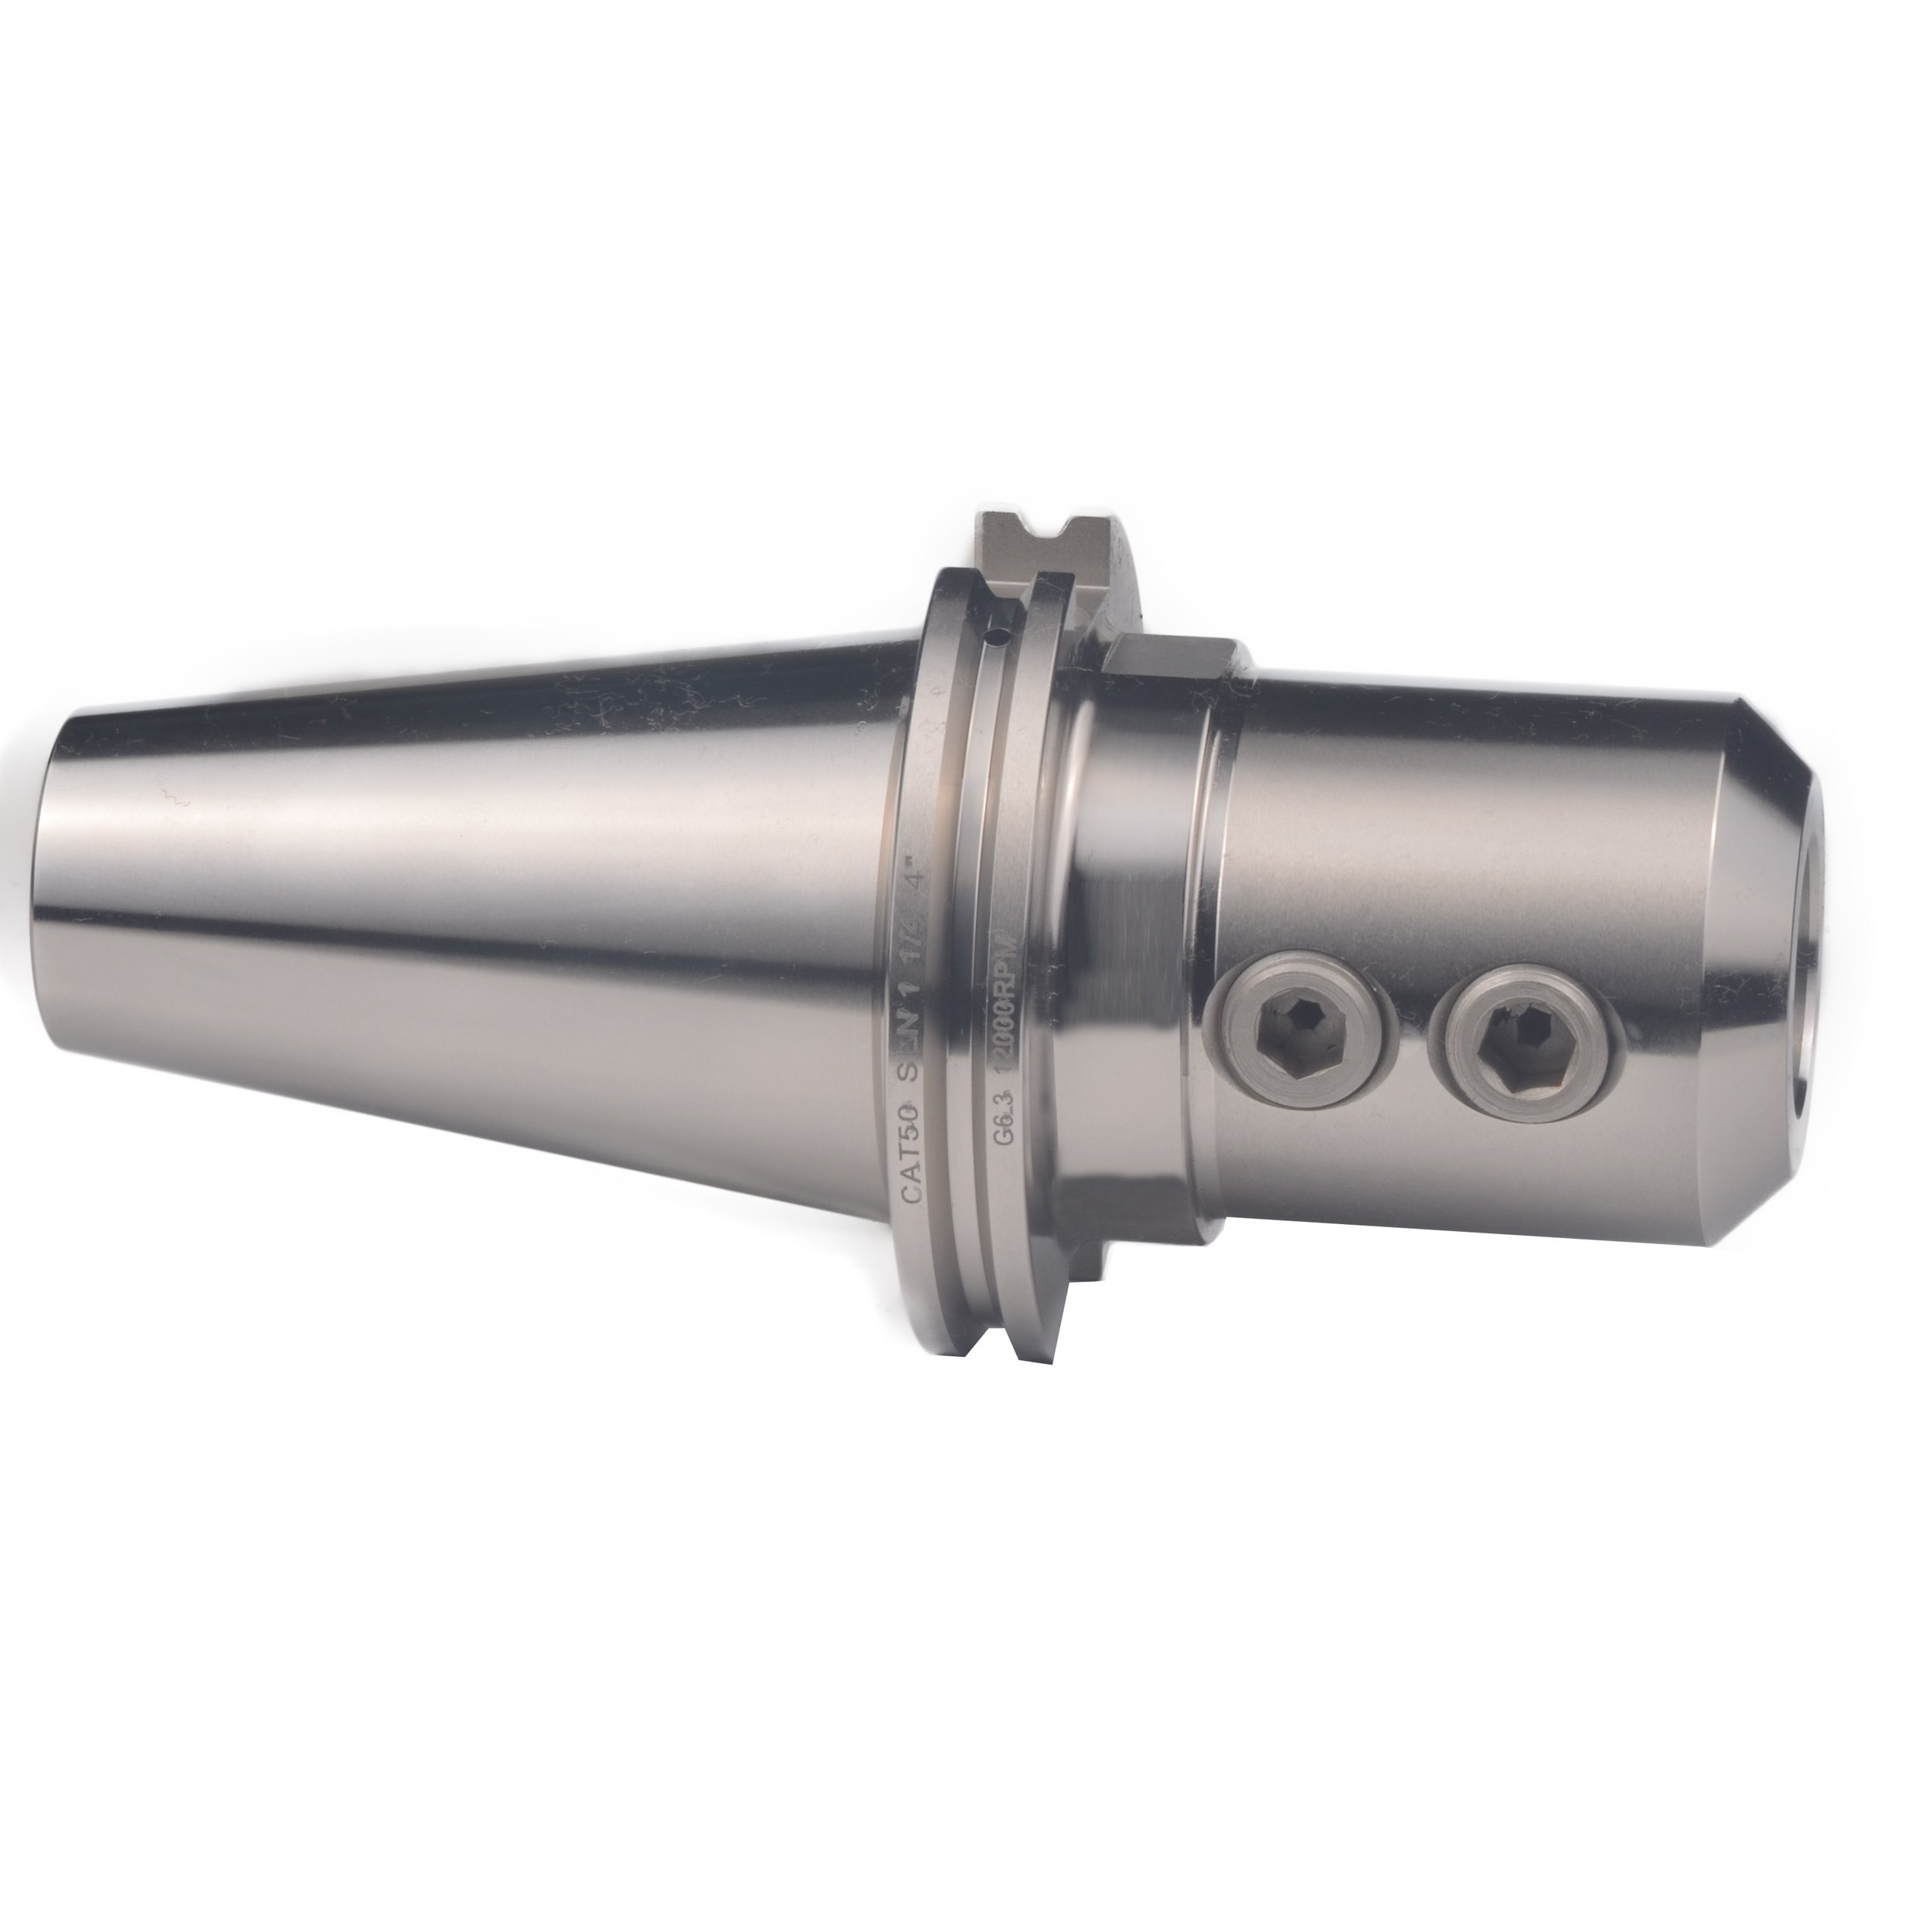 Details about   PIONEER NA CAT 50 TAPER x 2" END MILL HOLDER cnc milling machine tool ct50 arbor 